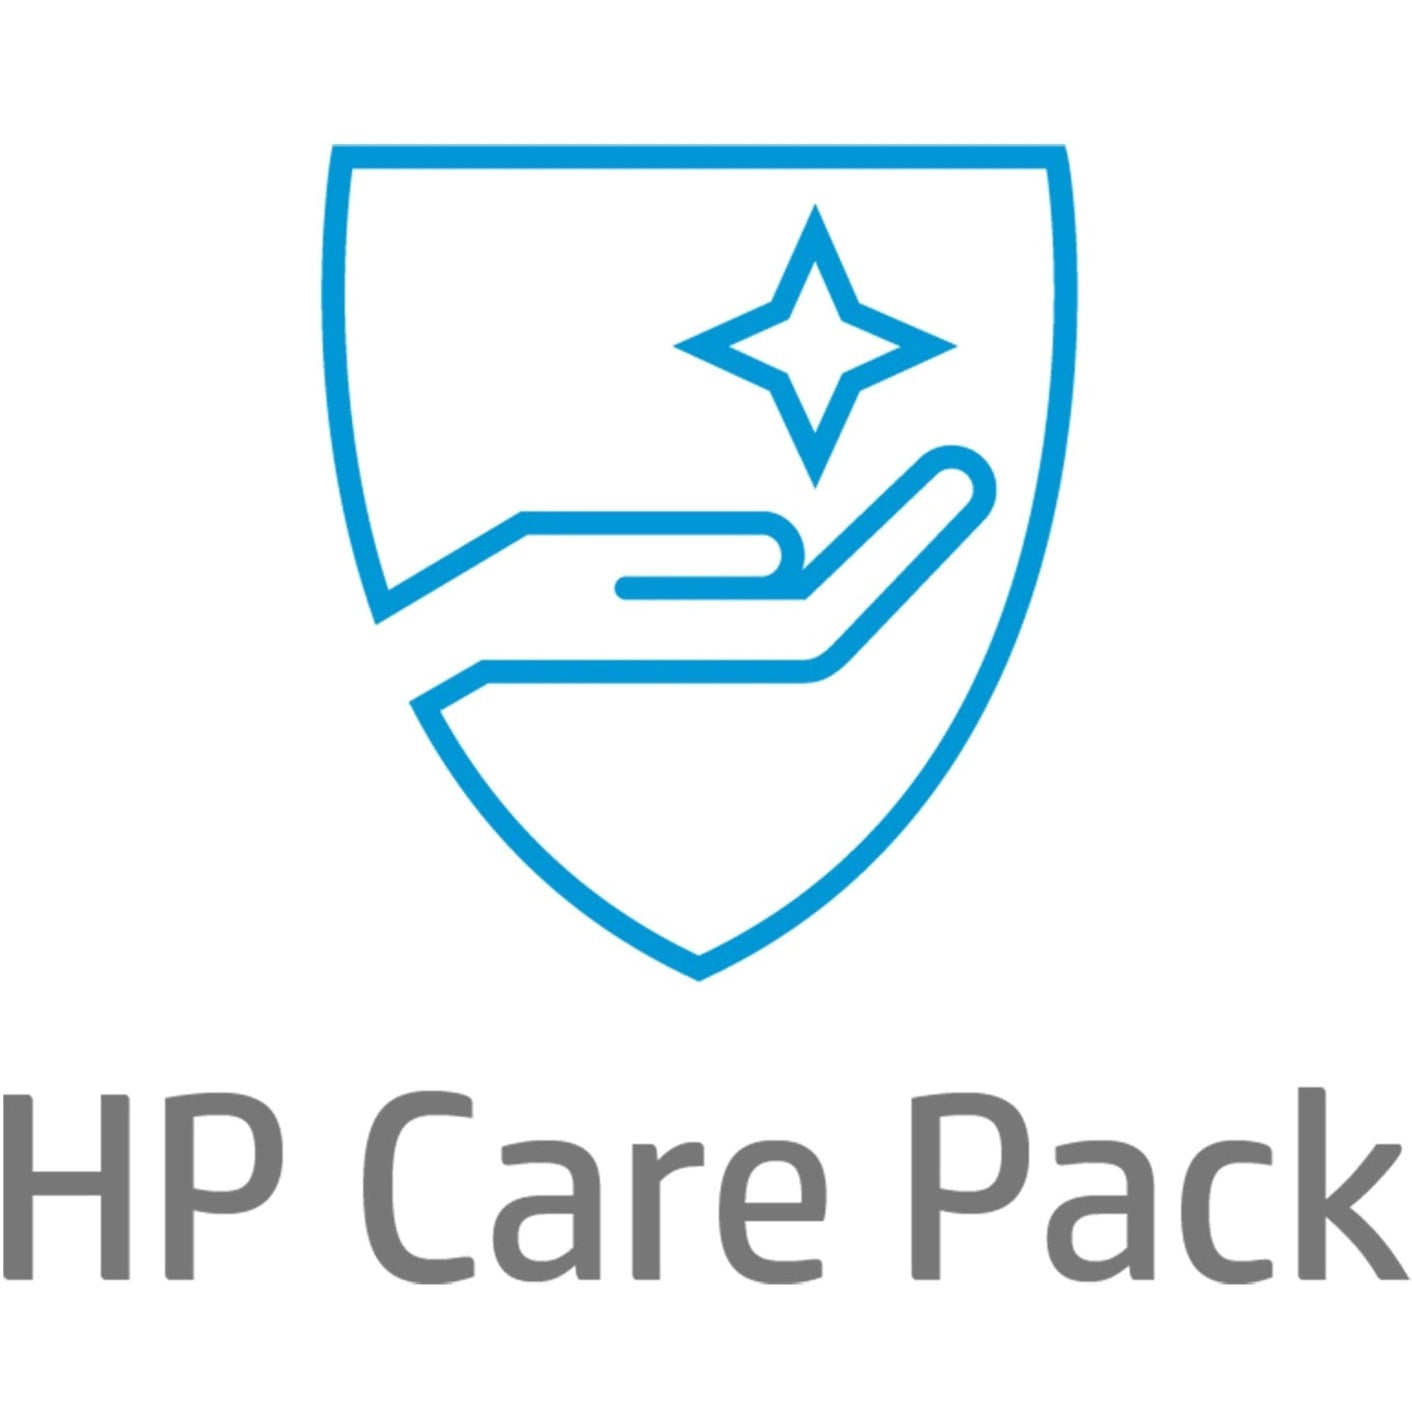 HP Care Pack Hardware Support with Defective Media Retention - 5 Year - Warranty (U9MZ5E)